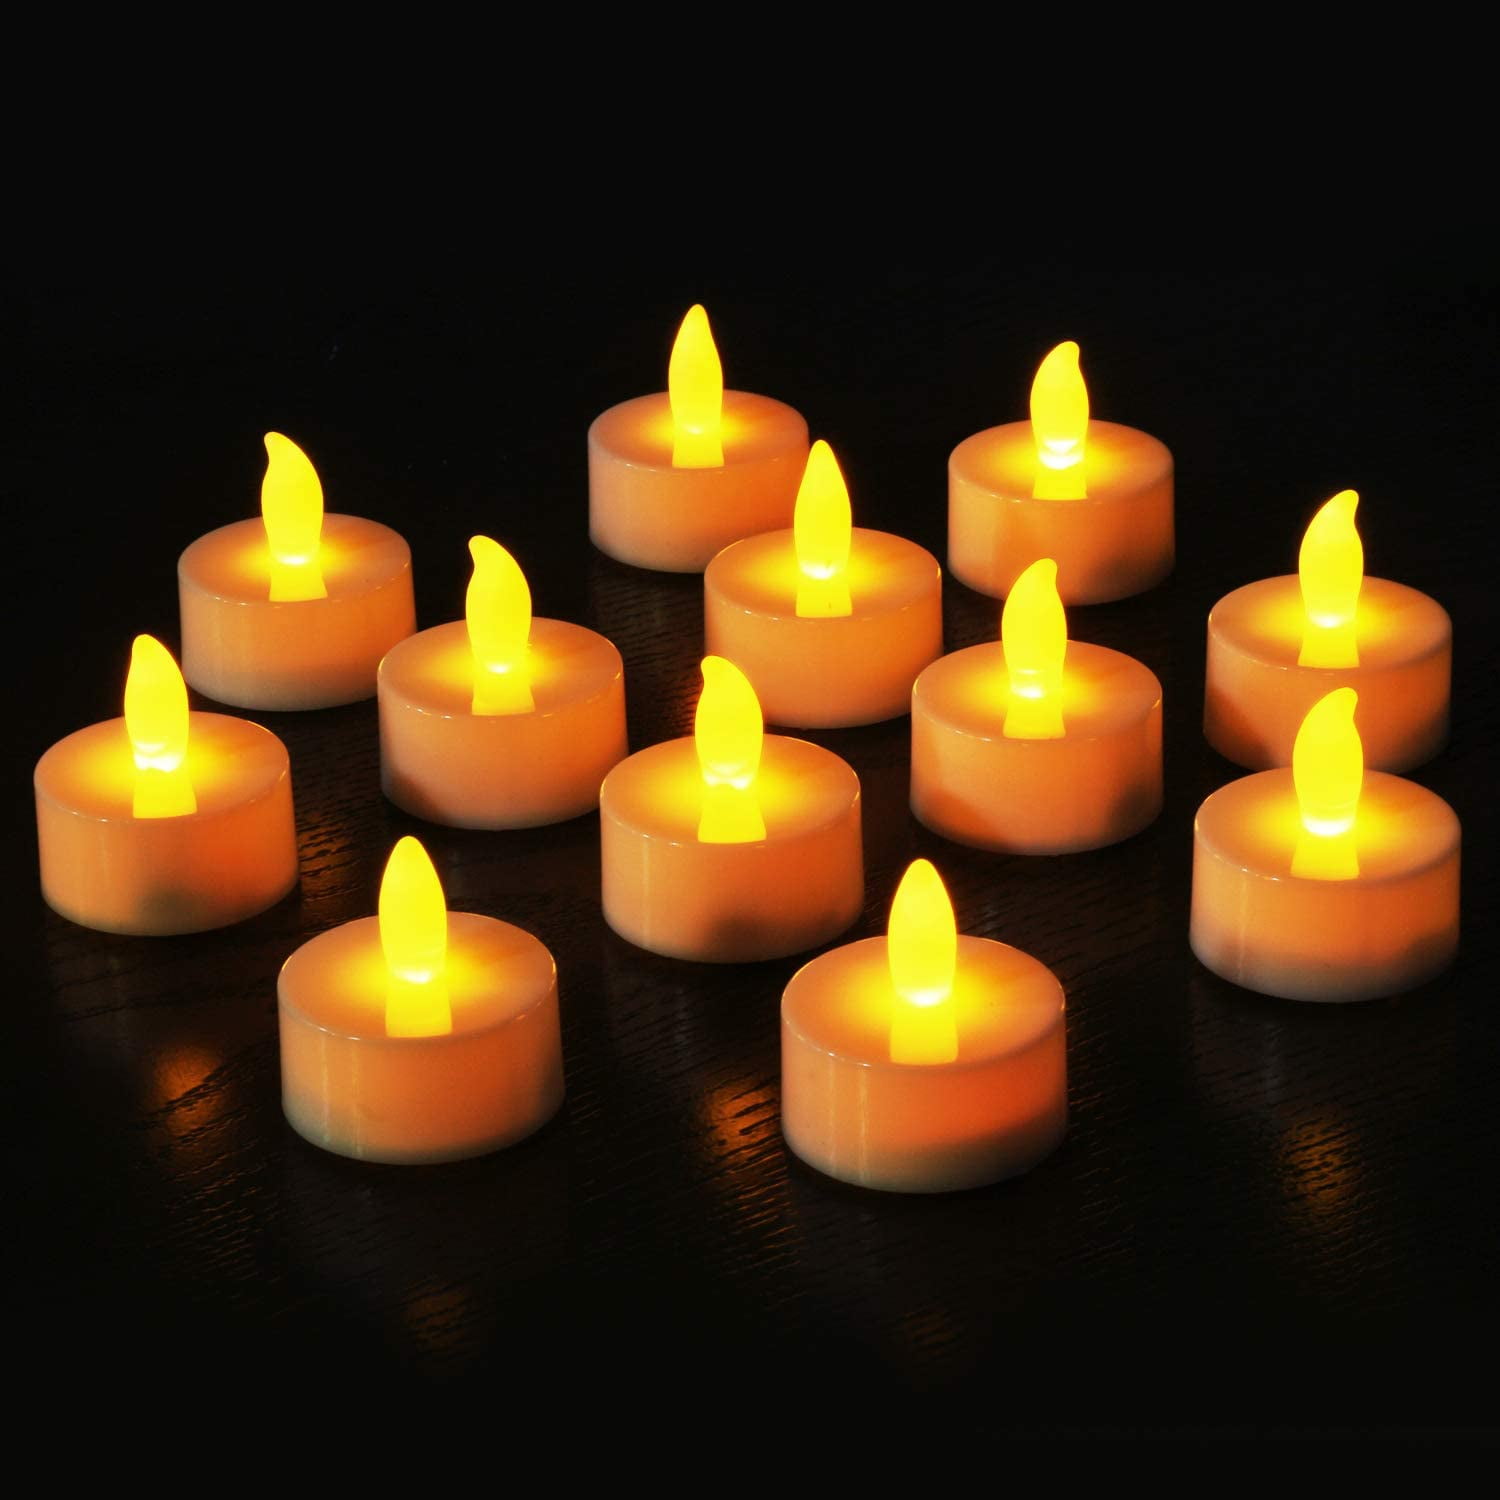 Qty 12 Battery Operated FLOATING Amber LED Tealights Tea Lights Flameless NEW 